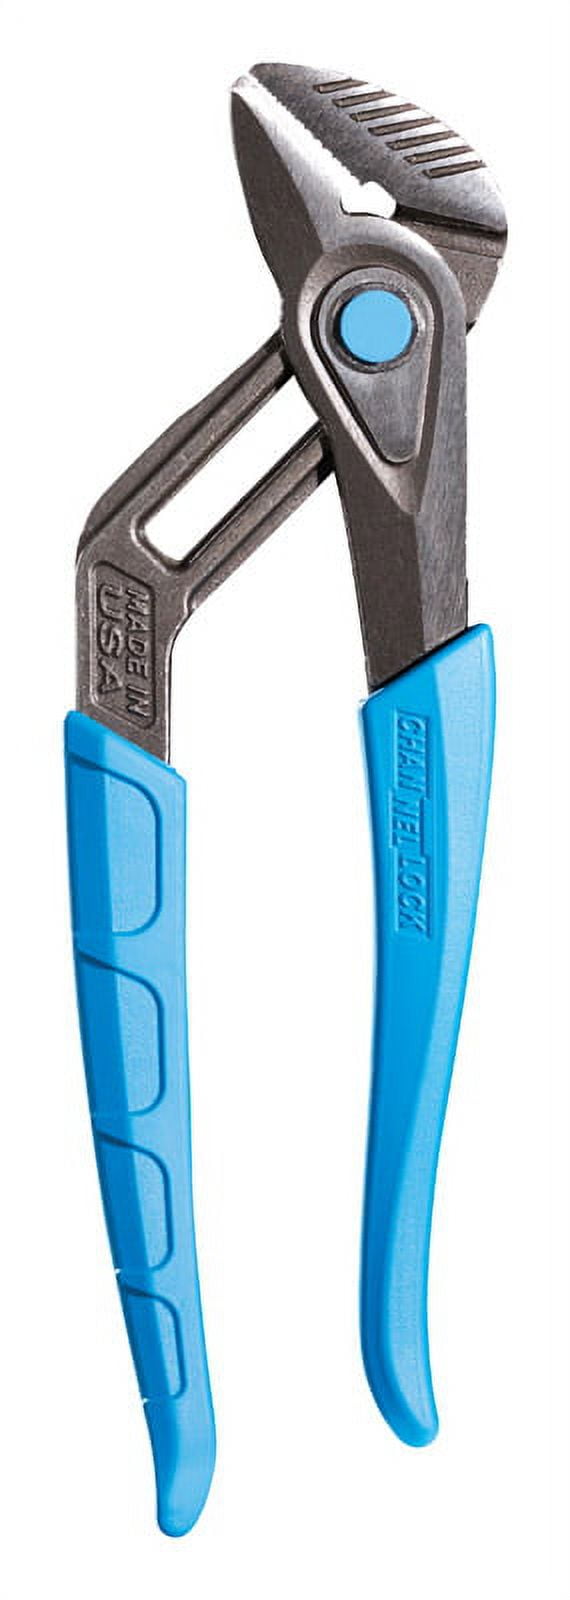 2885556 9.5 In. Carbon Steel Push Button Tongue & Groove Pliers, Blue